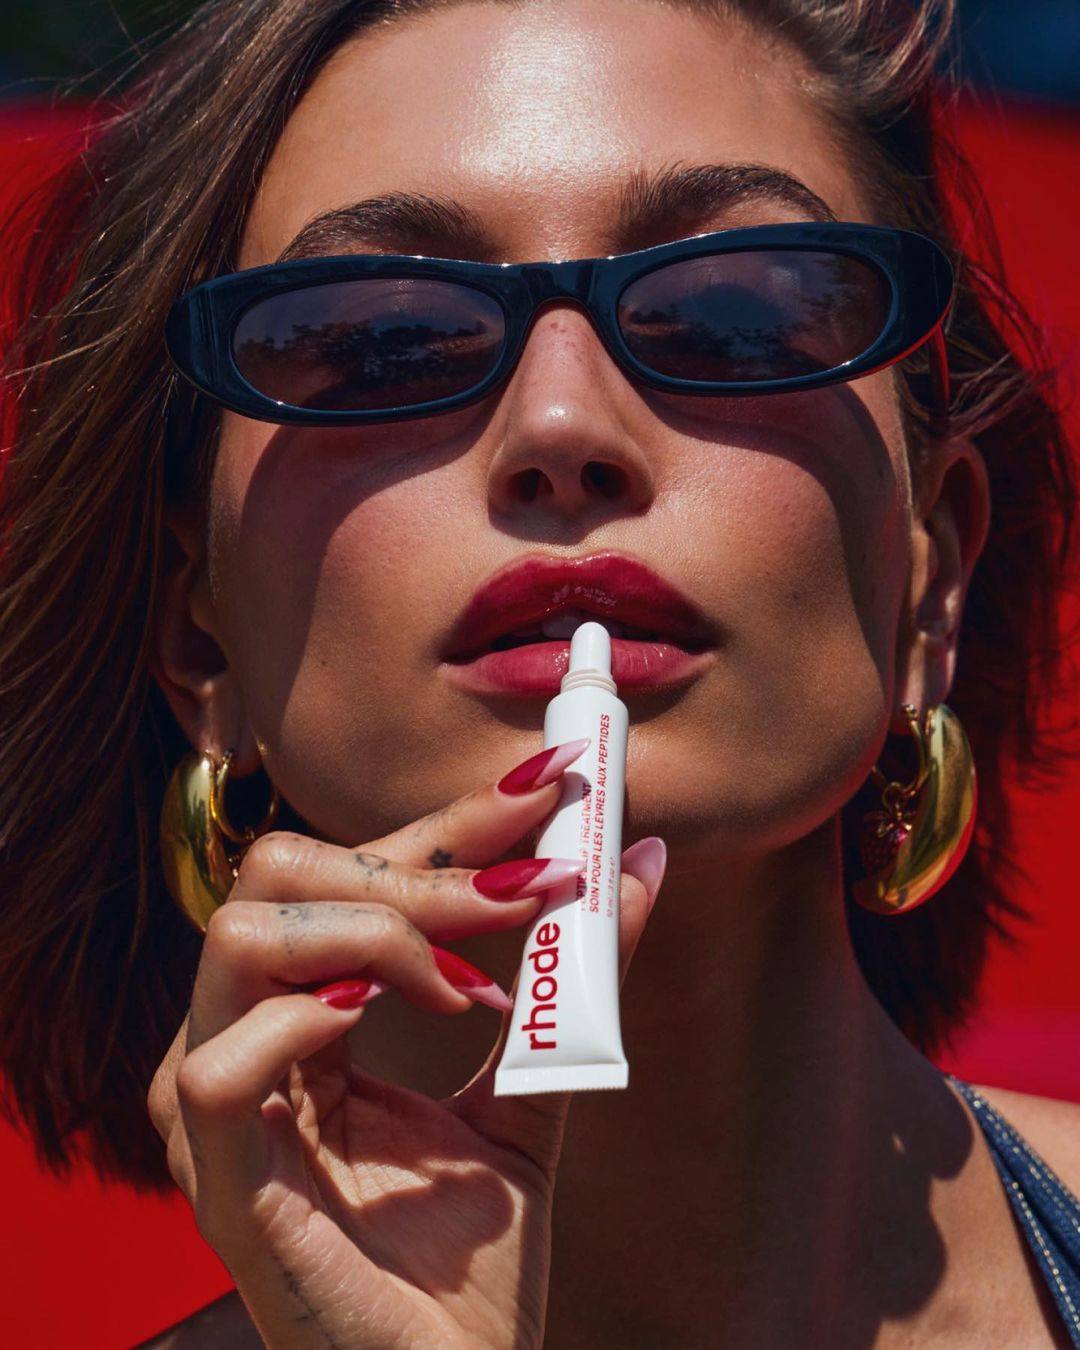 Hailey Bieber, who founded her make-up brand Rhode, has kicked off plenty of beauty trends on TikTok lately. Photo: @rhode/Instagram